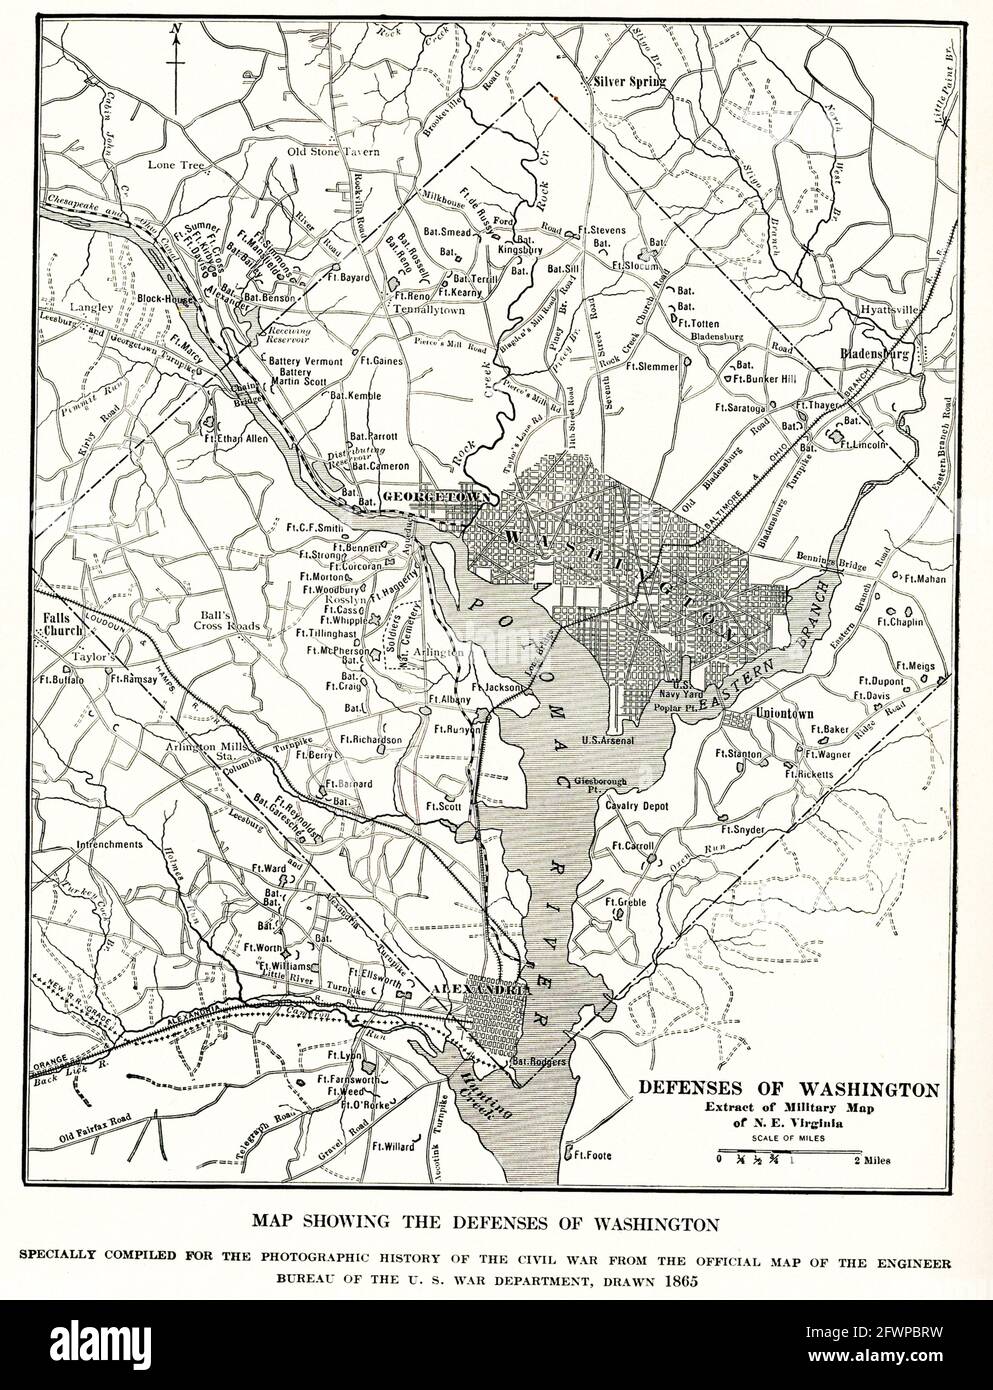 Map Showing defenses of Washington. specially compiled for photographic history of Civil War from the official map of the Engineer Bureau of the U.S. War Department drawn in 1865 Stock Photo